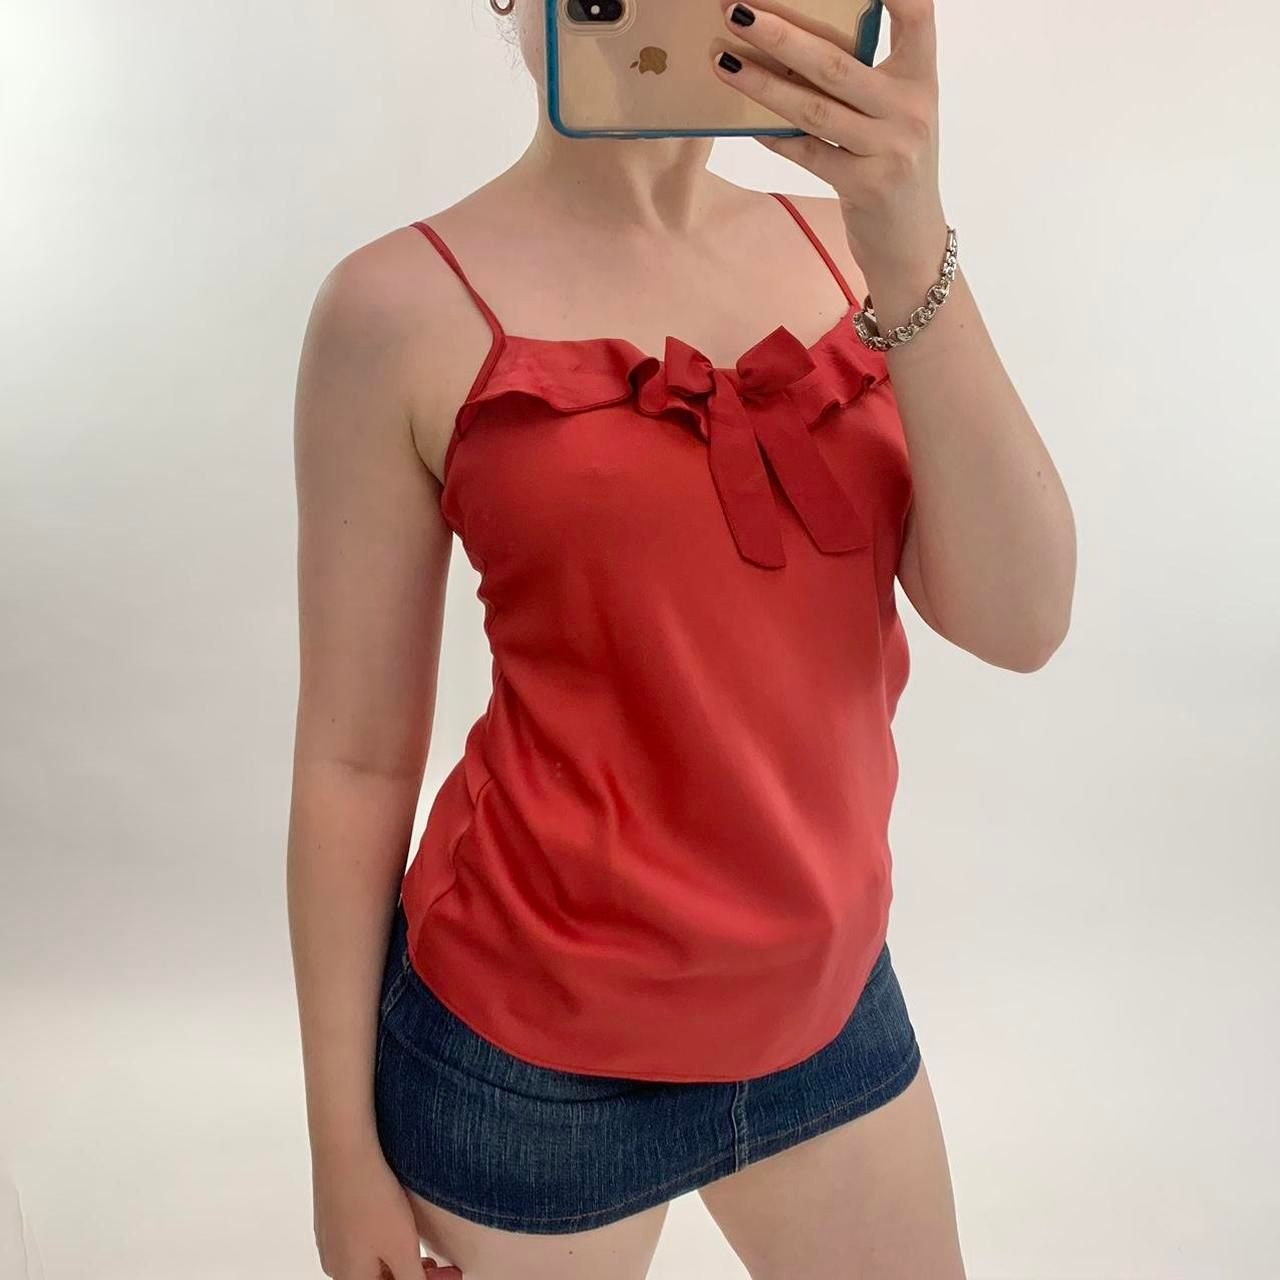 A size UK 8, 00's red bow cami top